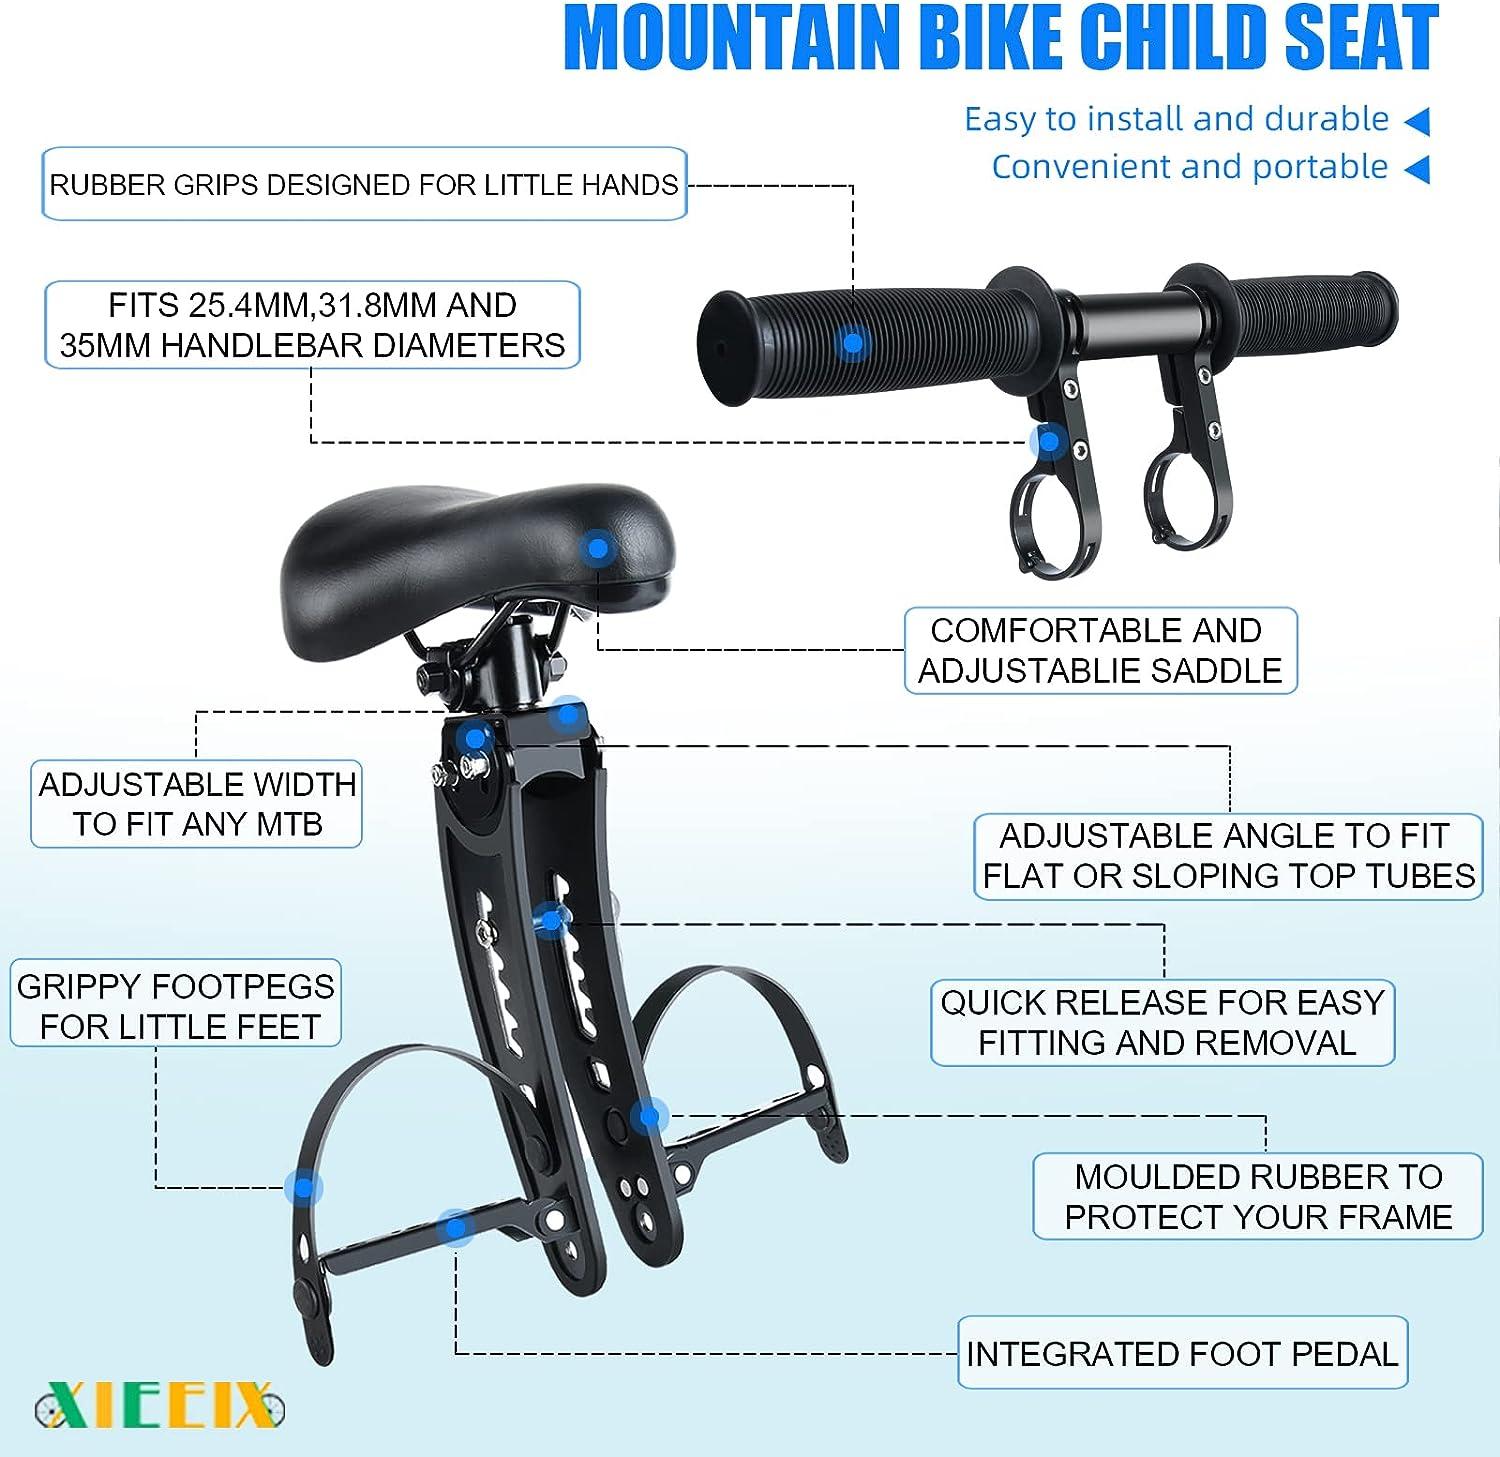 How Safe Is a Front Mount Child Bike Seat? - Do Little Bike Seats